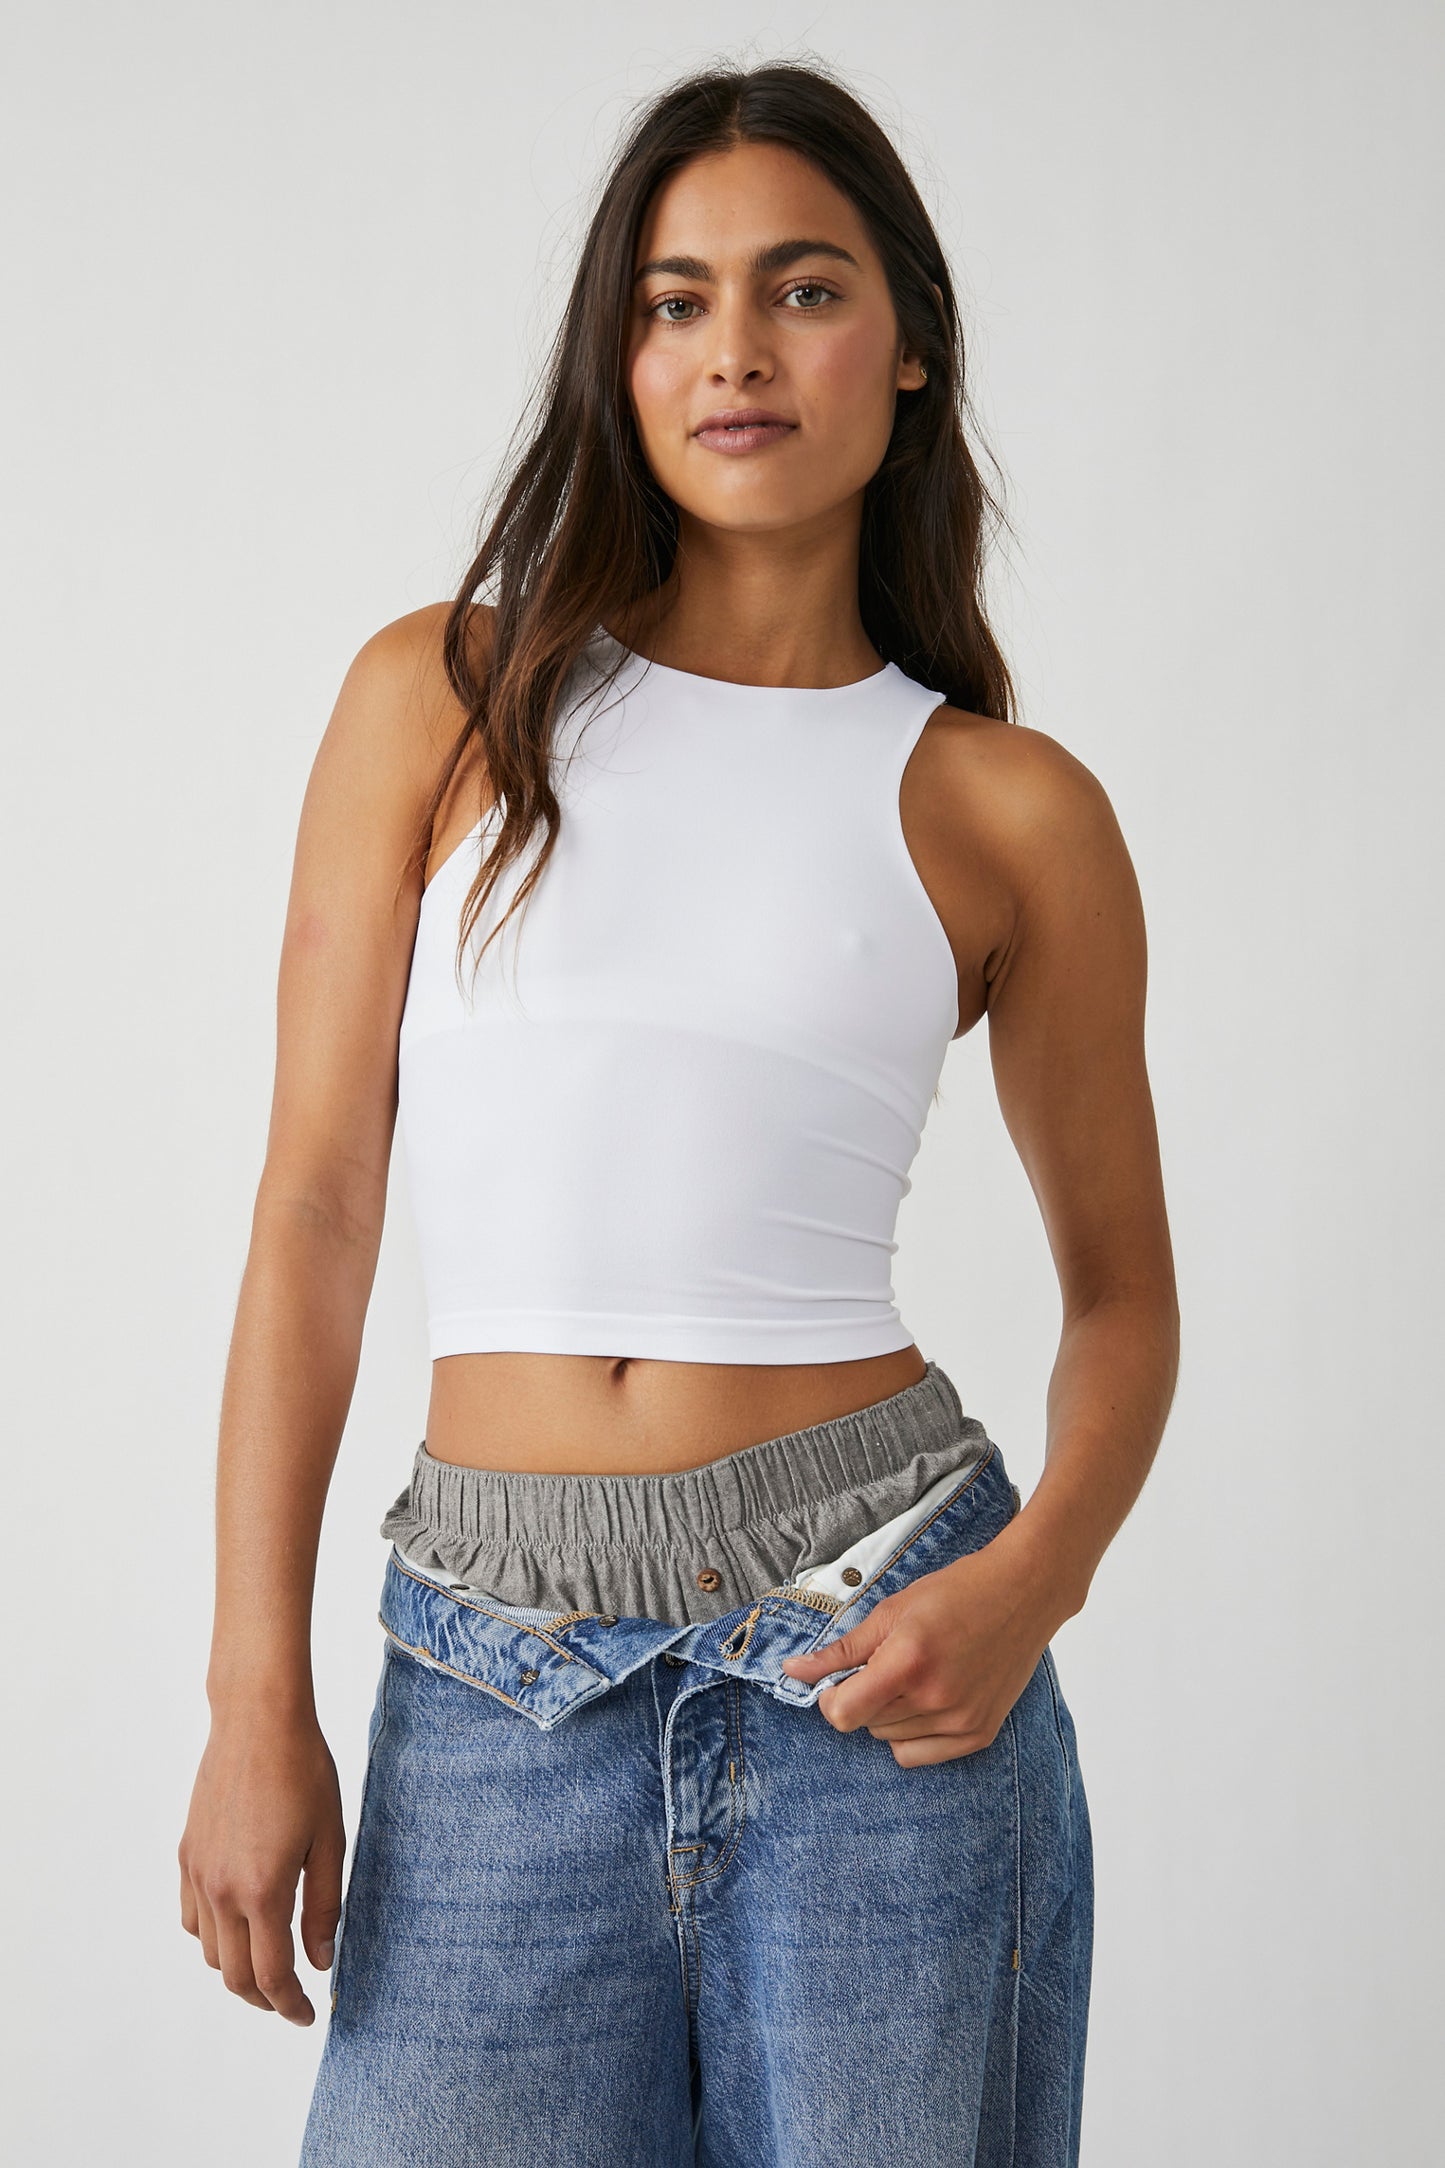 Free People: Clean Lines Cami - White